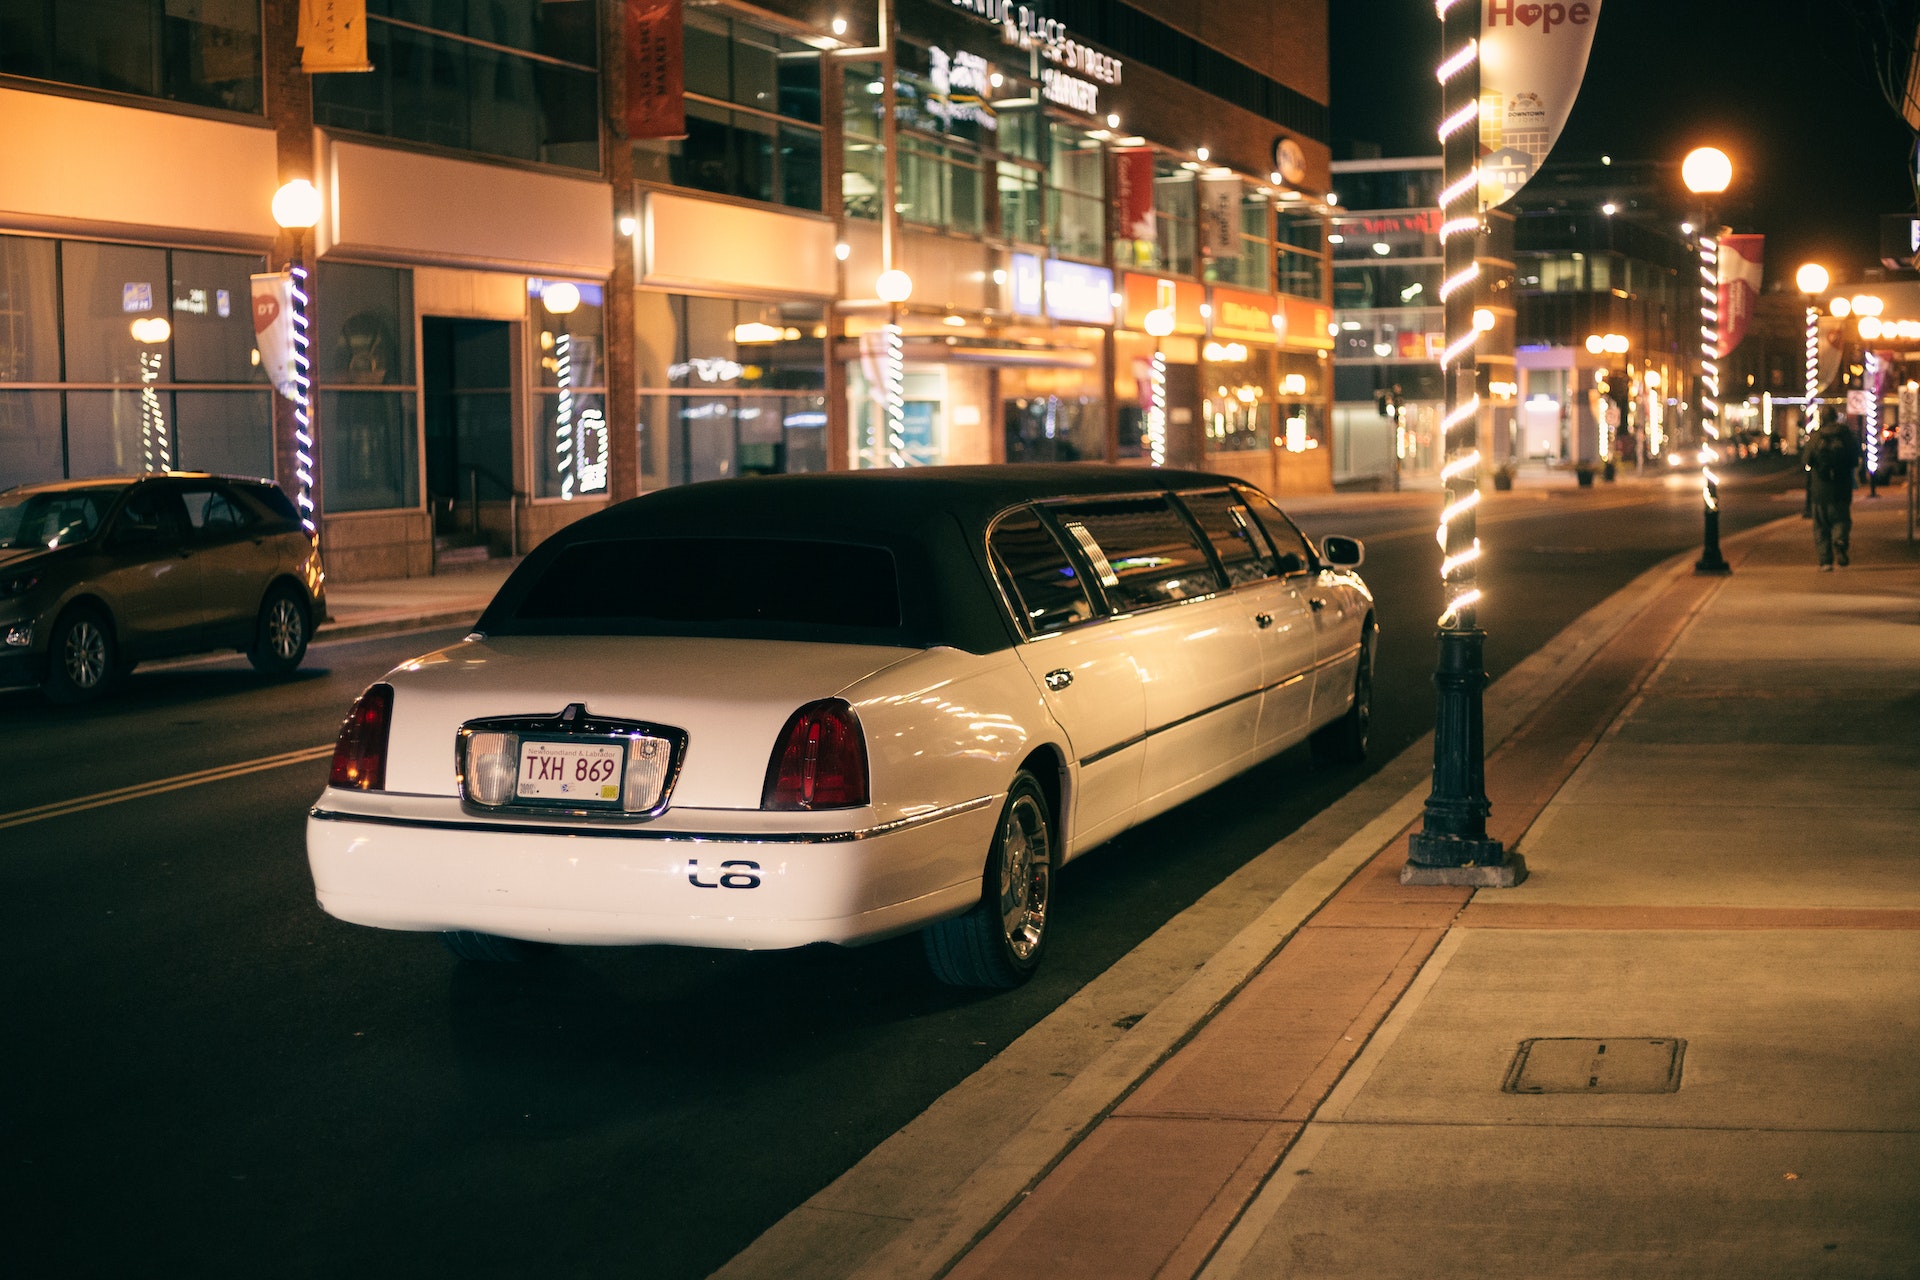 Luxury Beyond Roads: The World of Chauffeur-Driven Limousines”